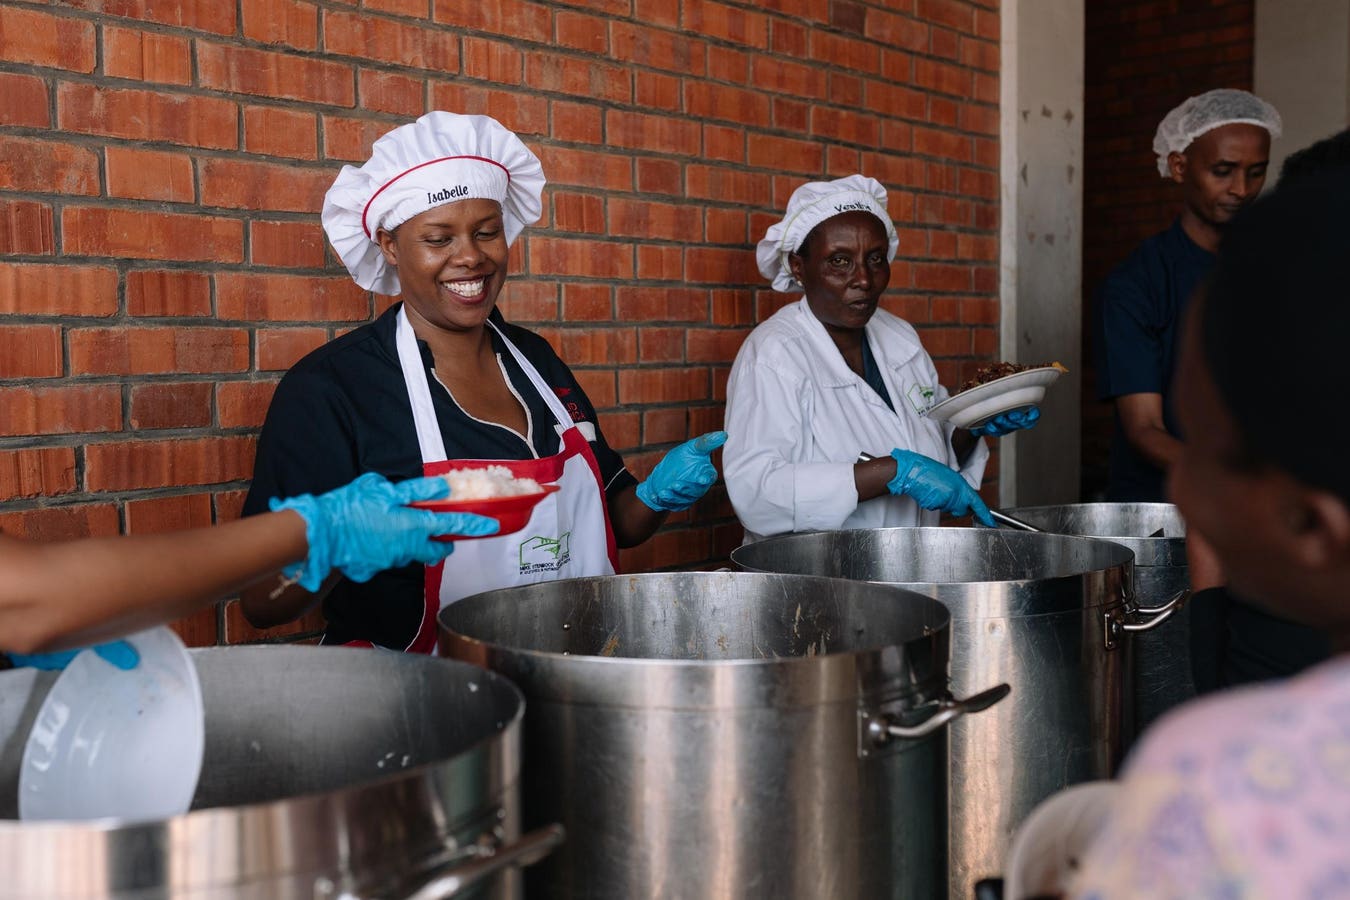 Meet The Team Putting Nutrition At The Center Of Hospital Care In Rwanda